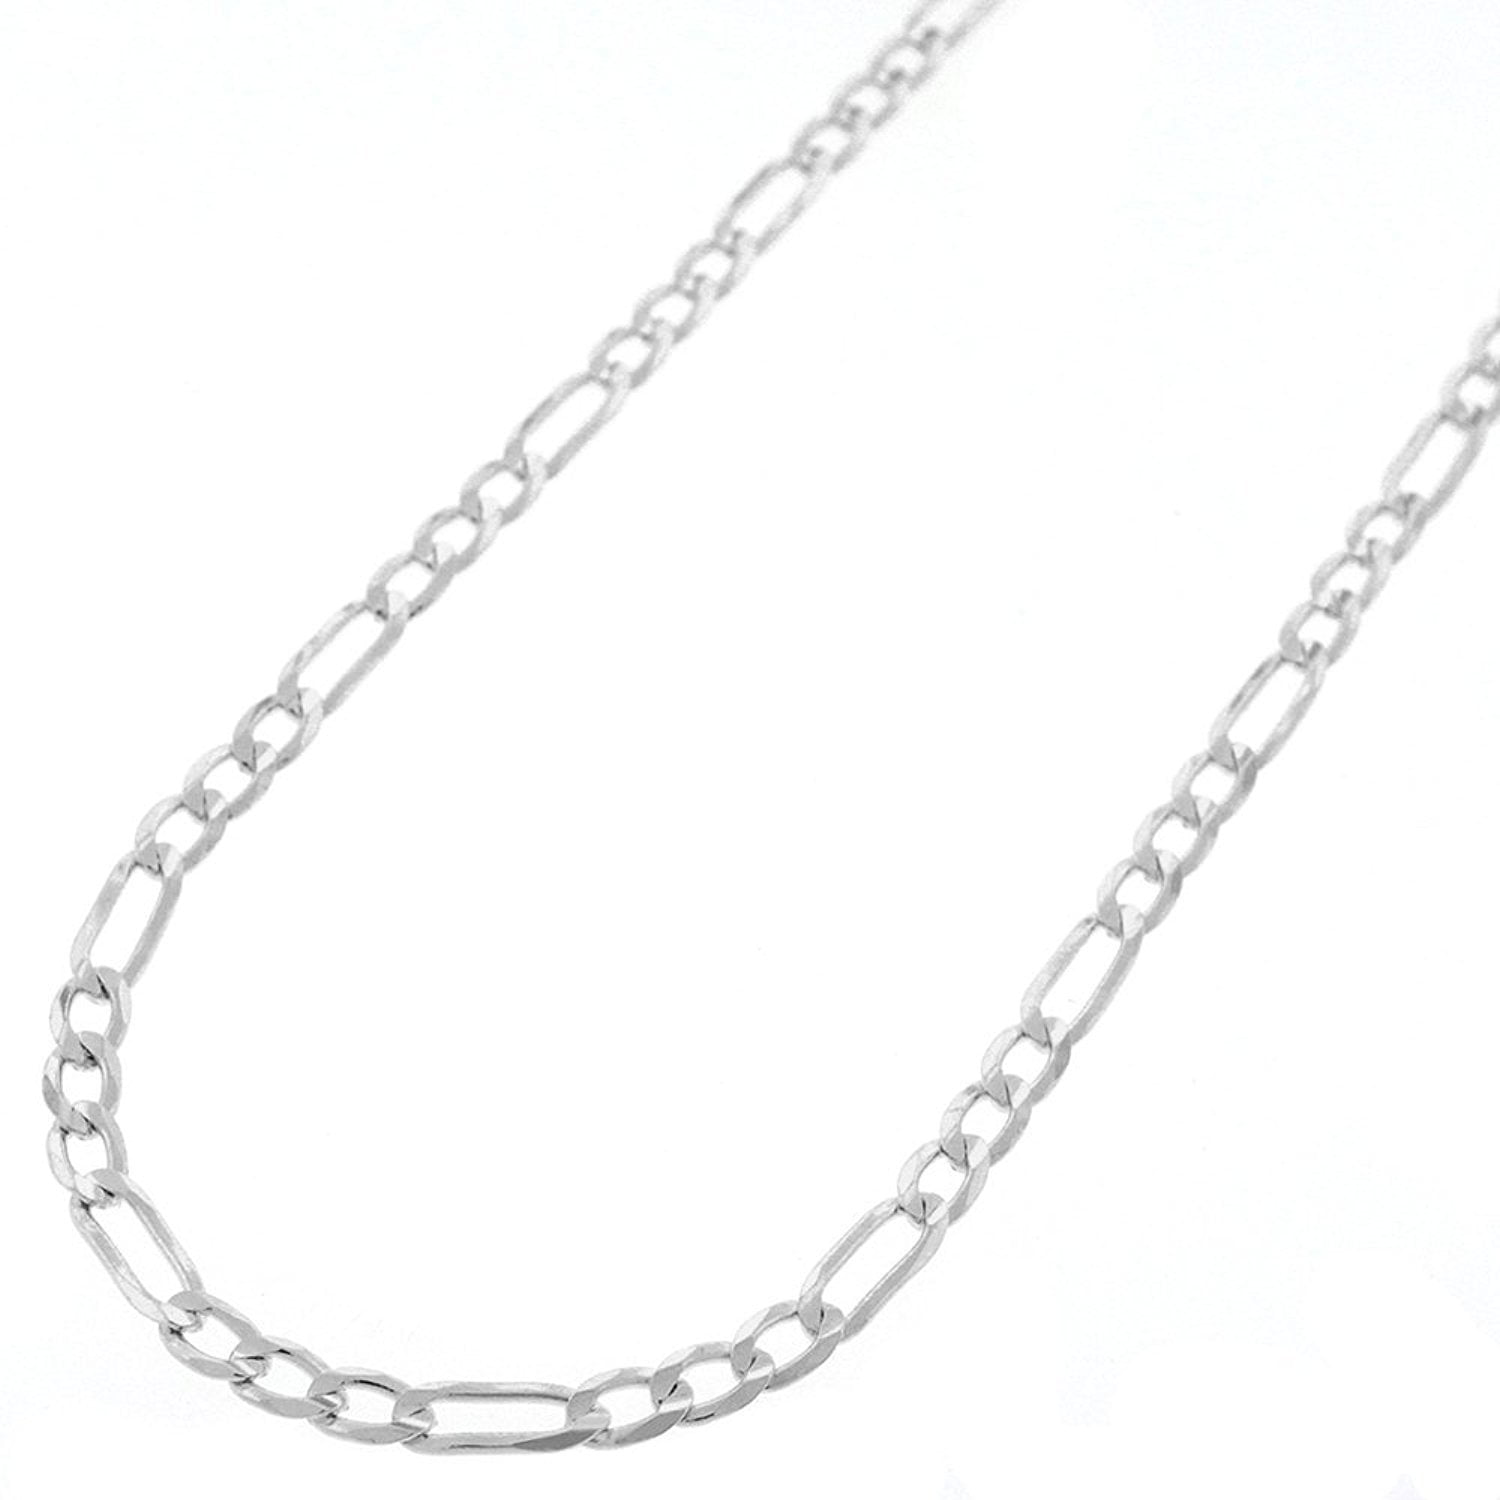 16-30 Inch Sterling Silver Chain for Men and Women Next Level Jewelry Genuine Sterling Silver Flexible Snake Chain Necklace .925 ITProLux 2MM-5MM Made In Italy 